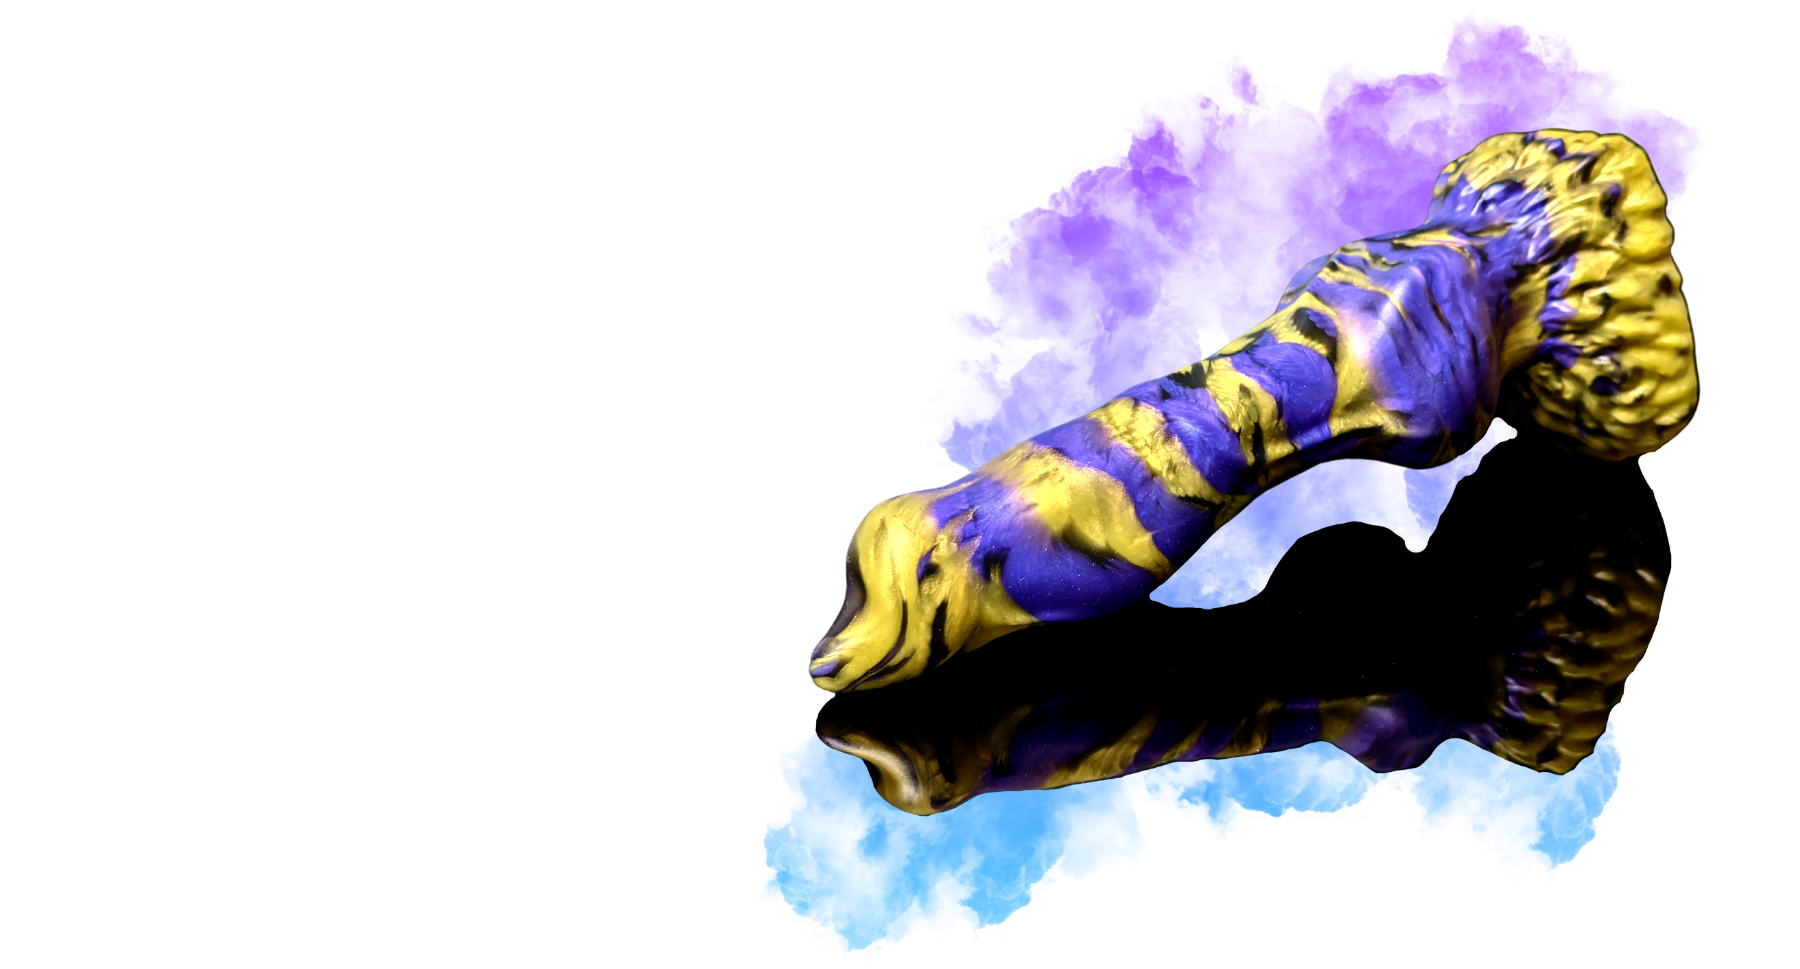 Marble color Cerberus dog dick dildo on a reflective surface with a blue and purple smokey background.